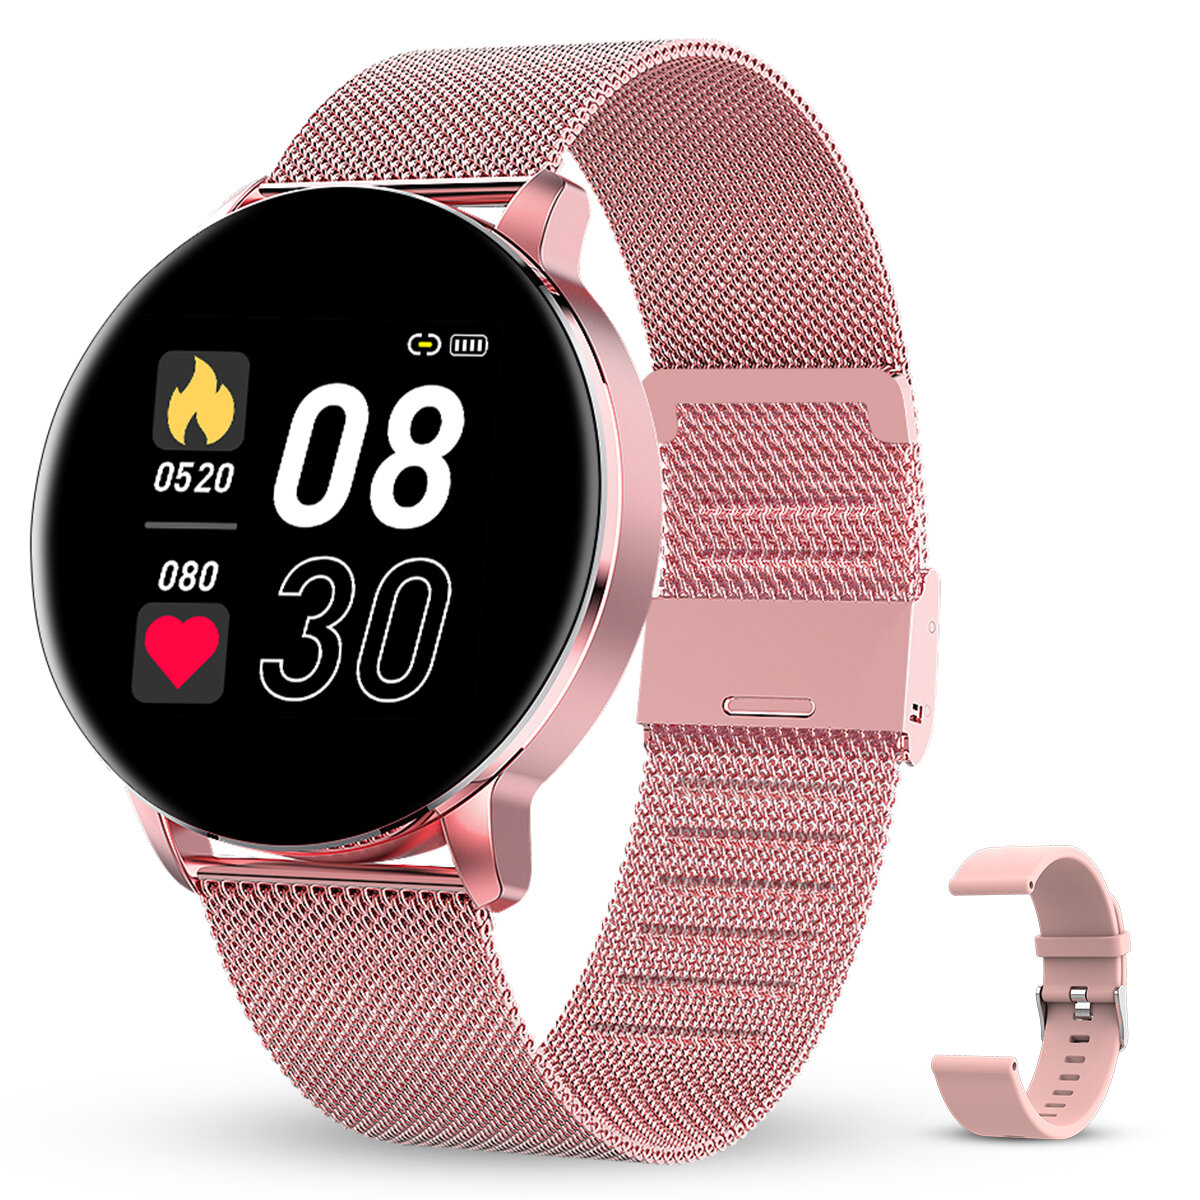 GOKOO R5L 1.3 inch IPS Full Touch Screen bluetooth 5.0 Heart Rate Blood Pressure SpO2 Monitor Multi-sport Modes Dial Mar